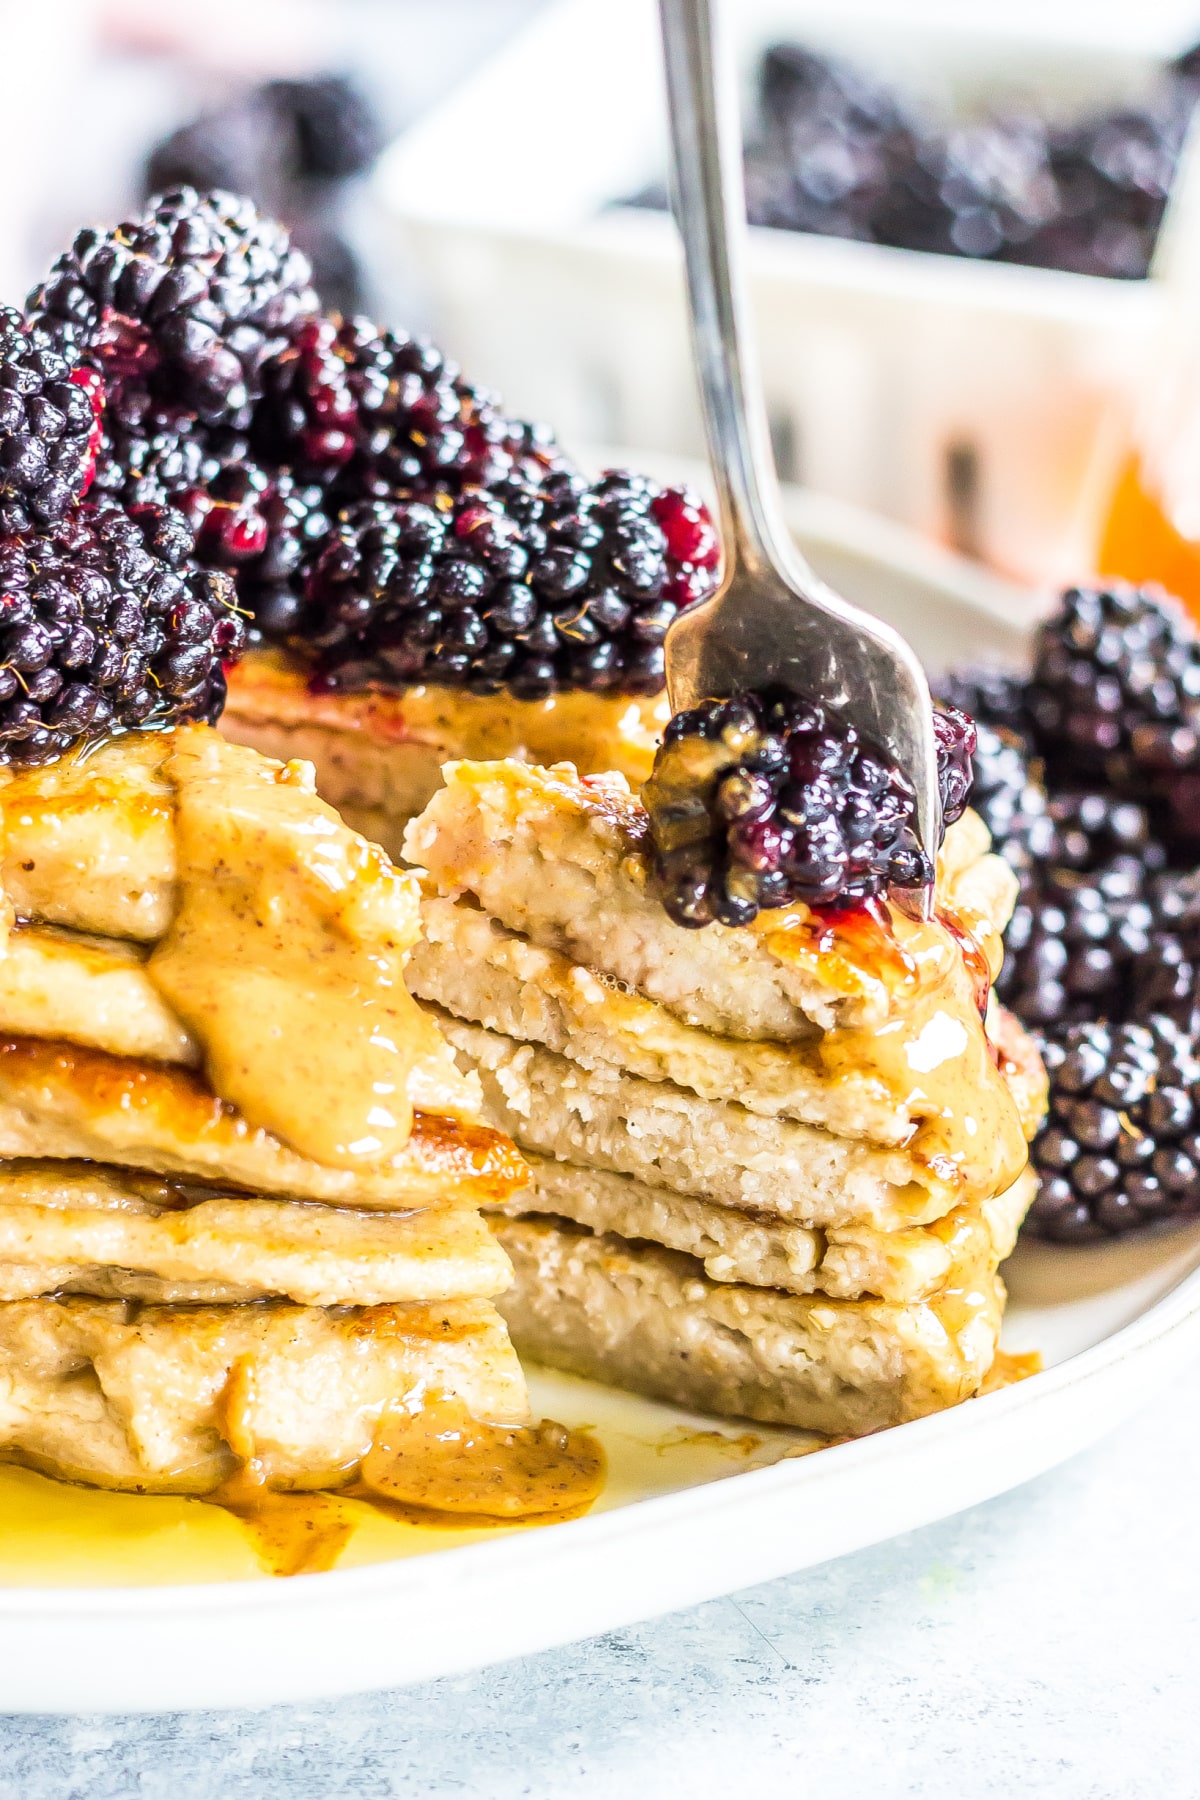 A stack of applesauce pancakes topped with peanut butter and blackberries has one bite sliced out with a fork stuck through the bite.